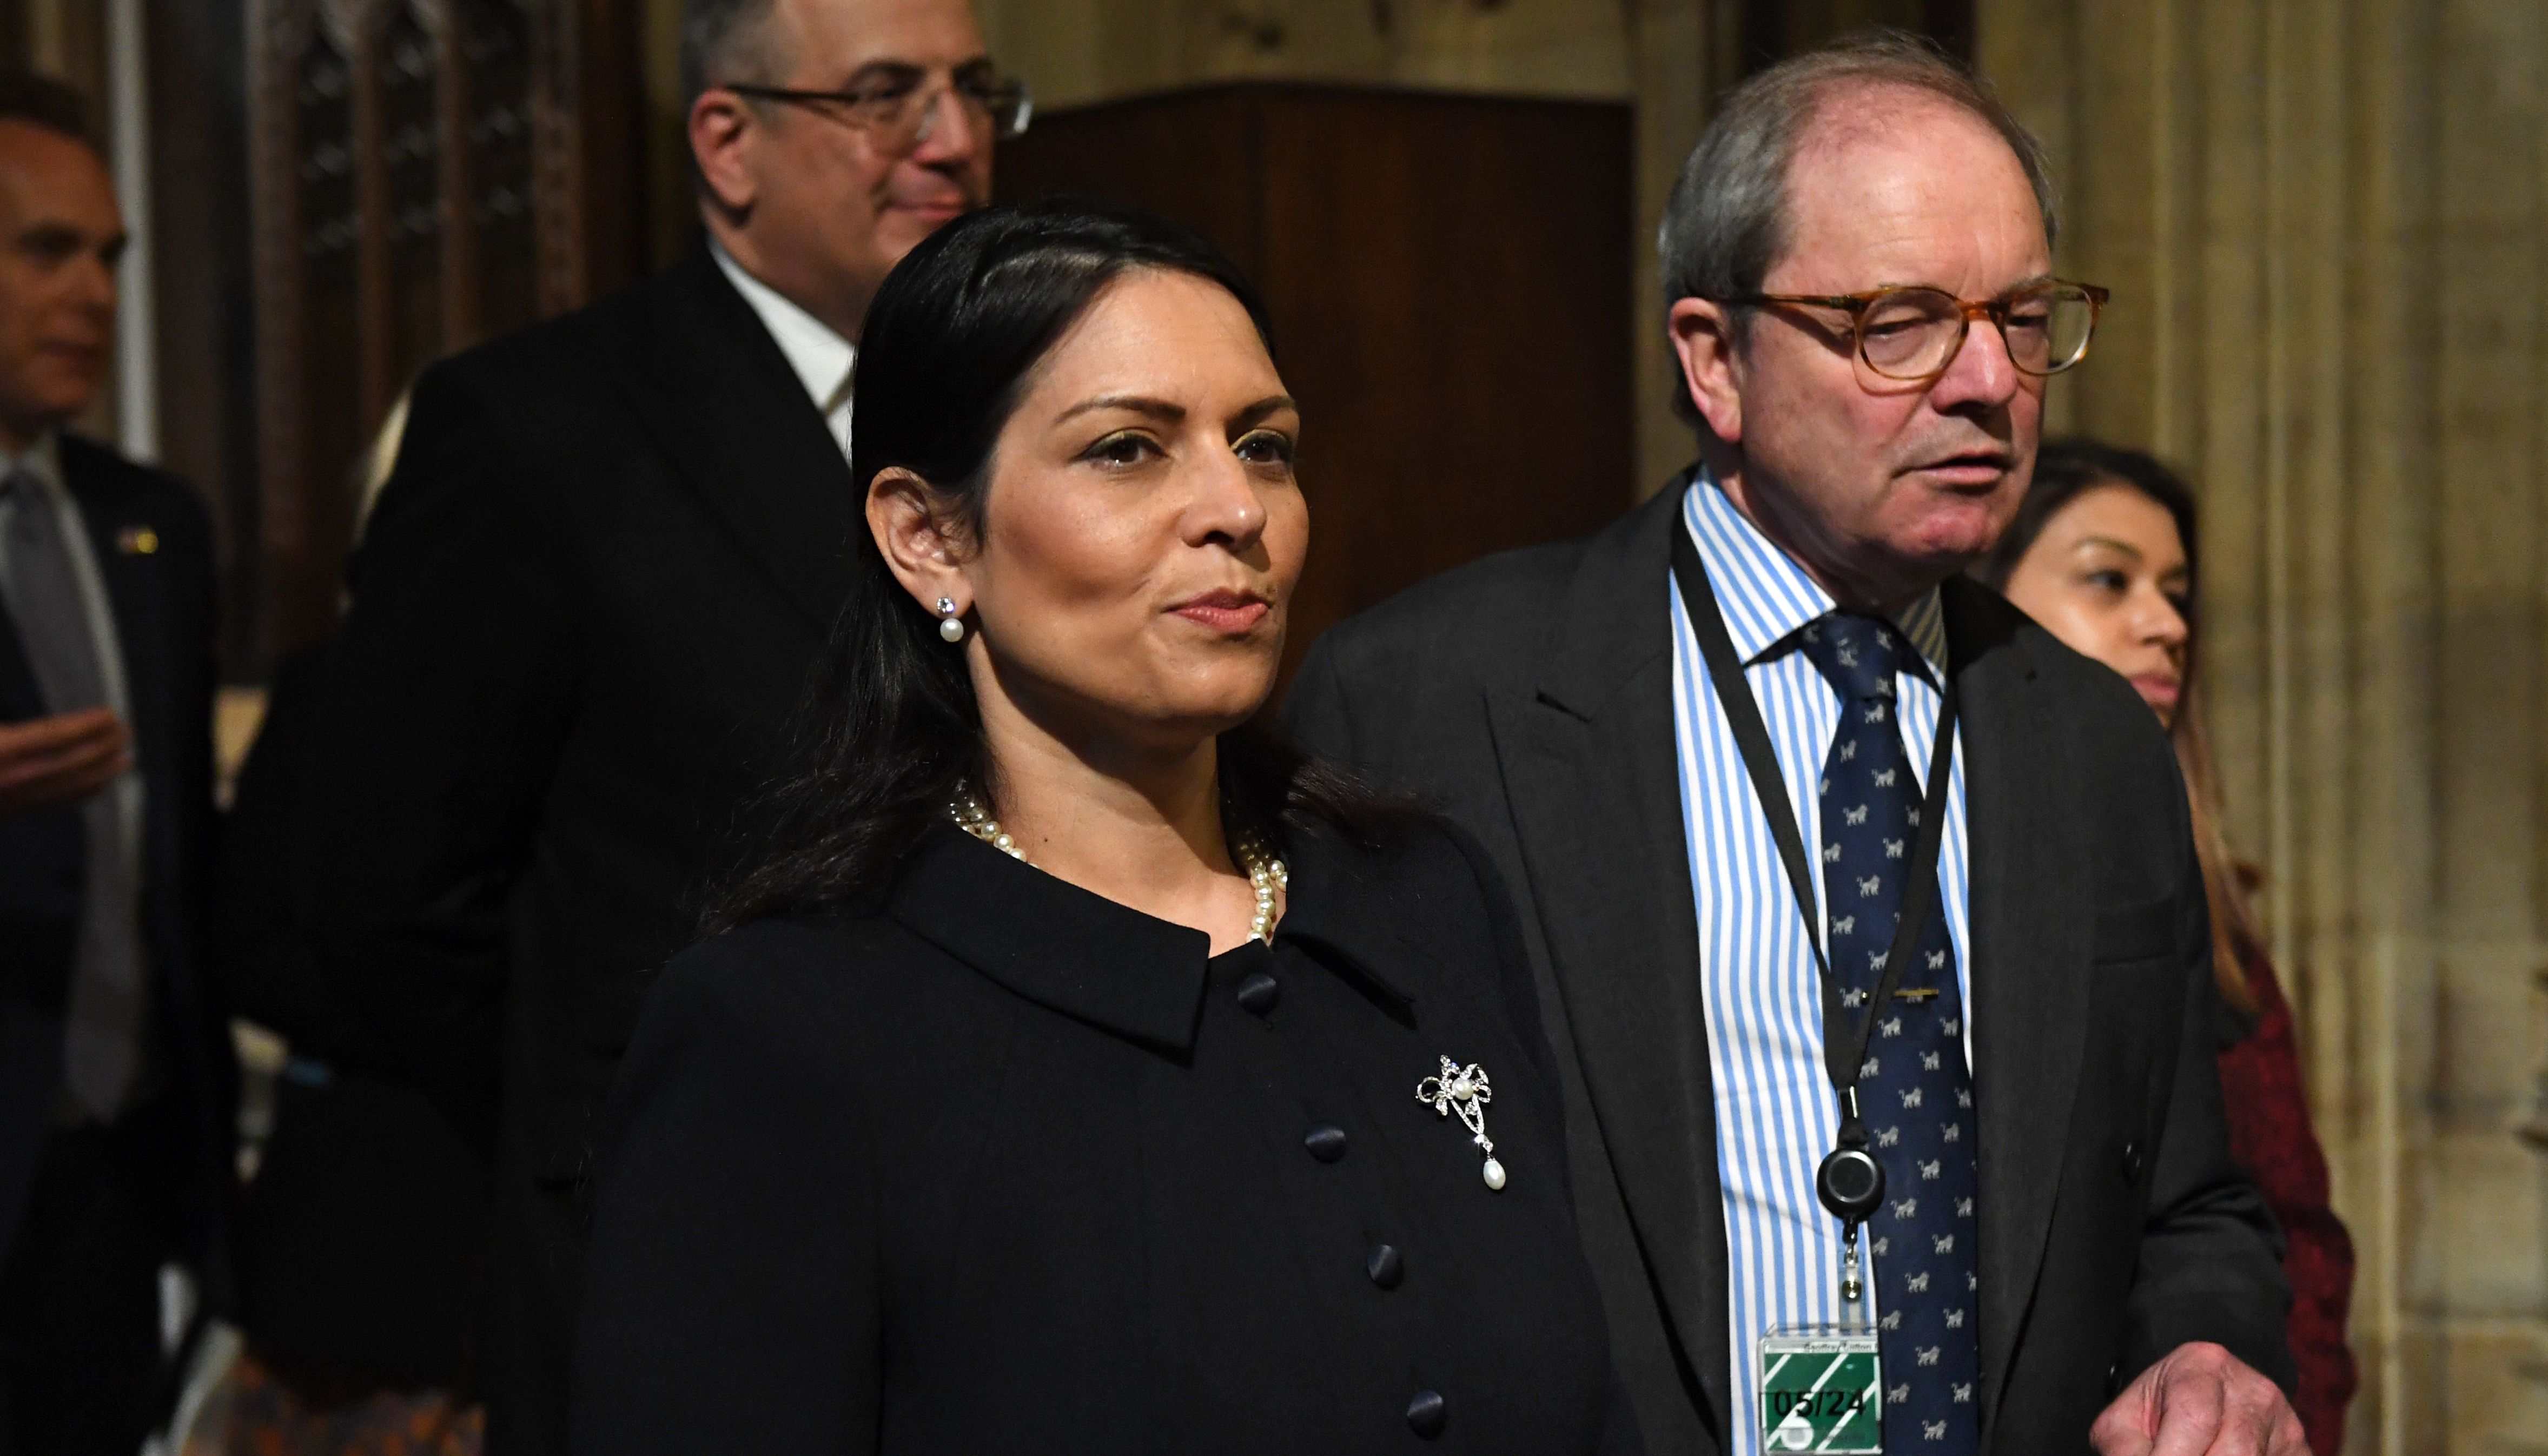 Home Secretary Priti Patel walks through the Central Lobby at the Palace of Westminster